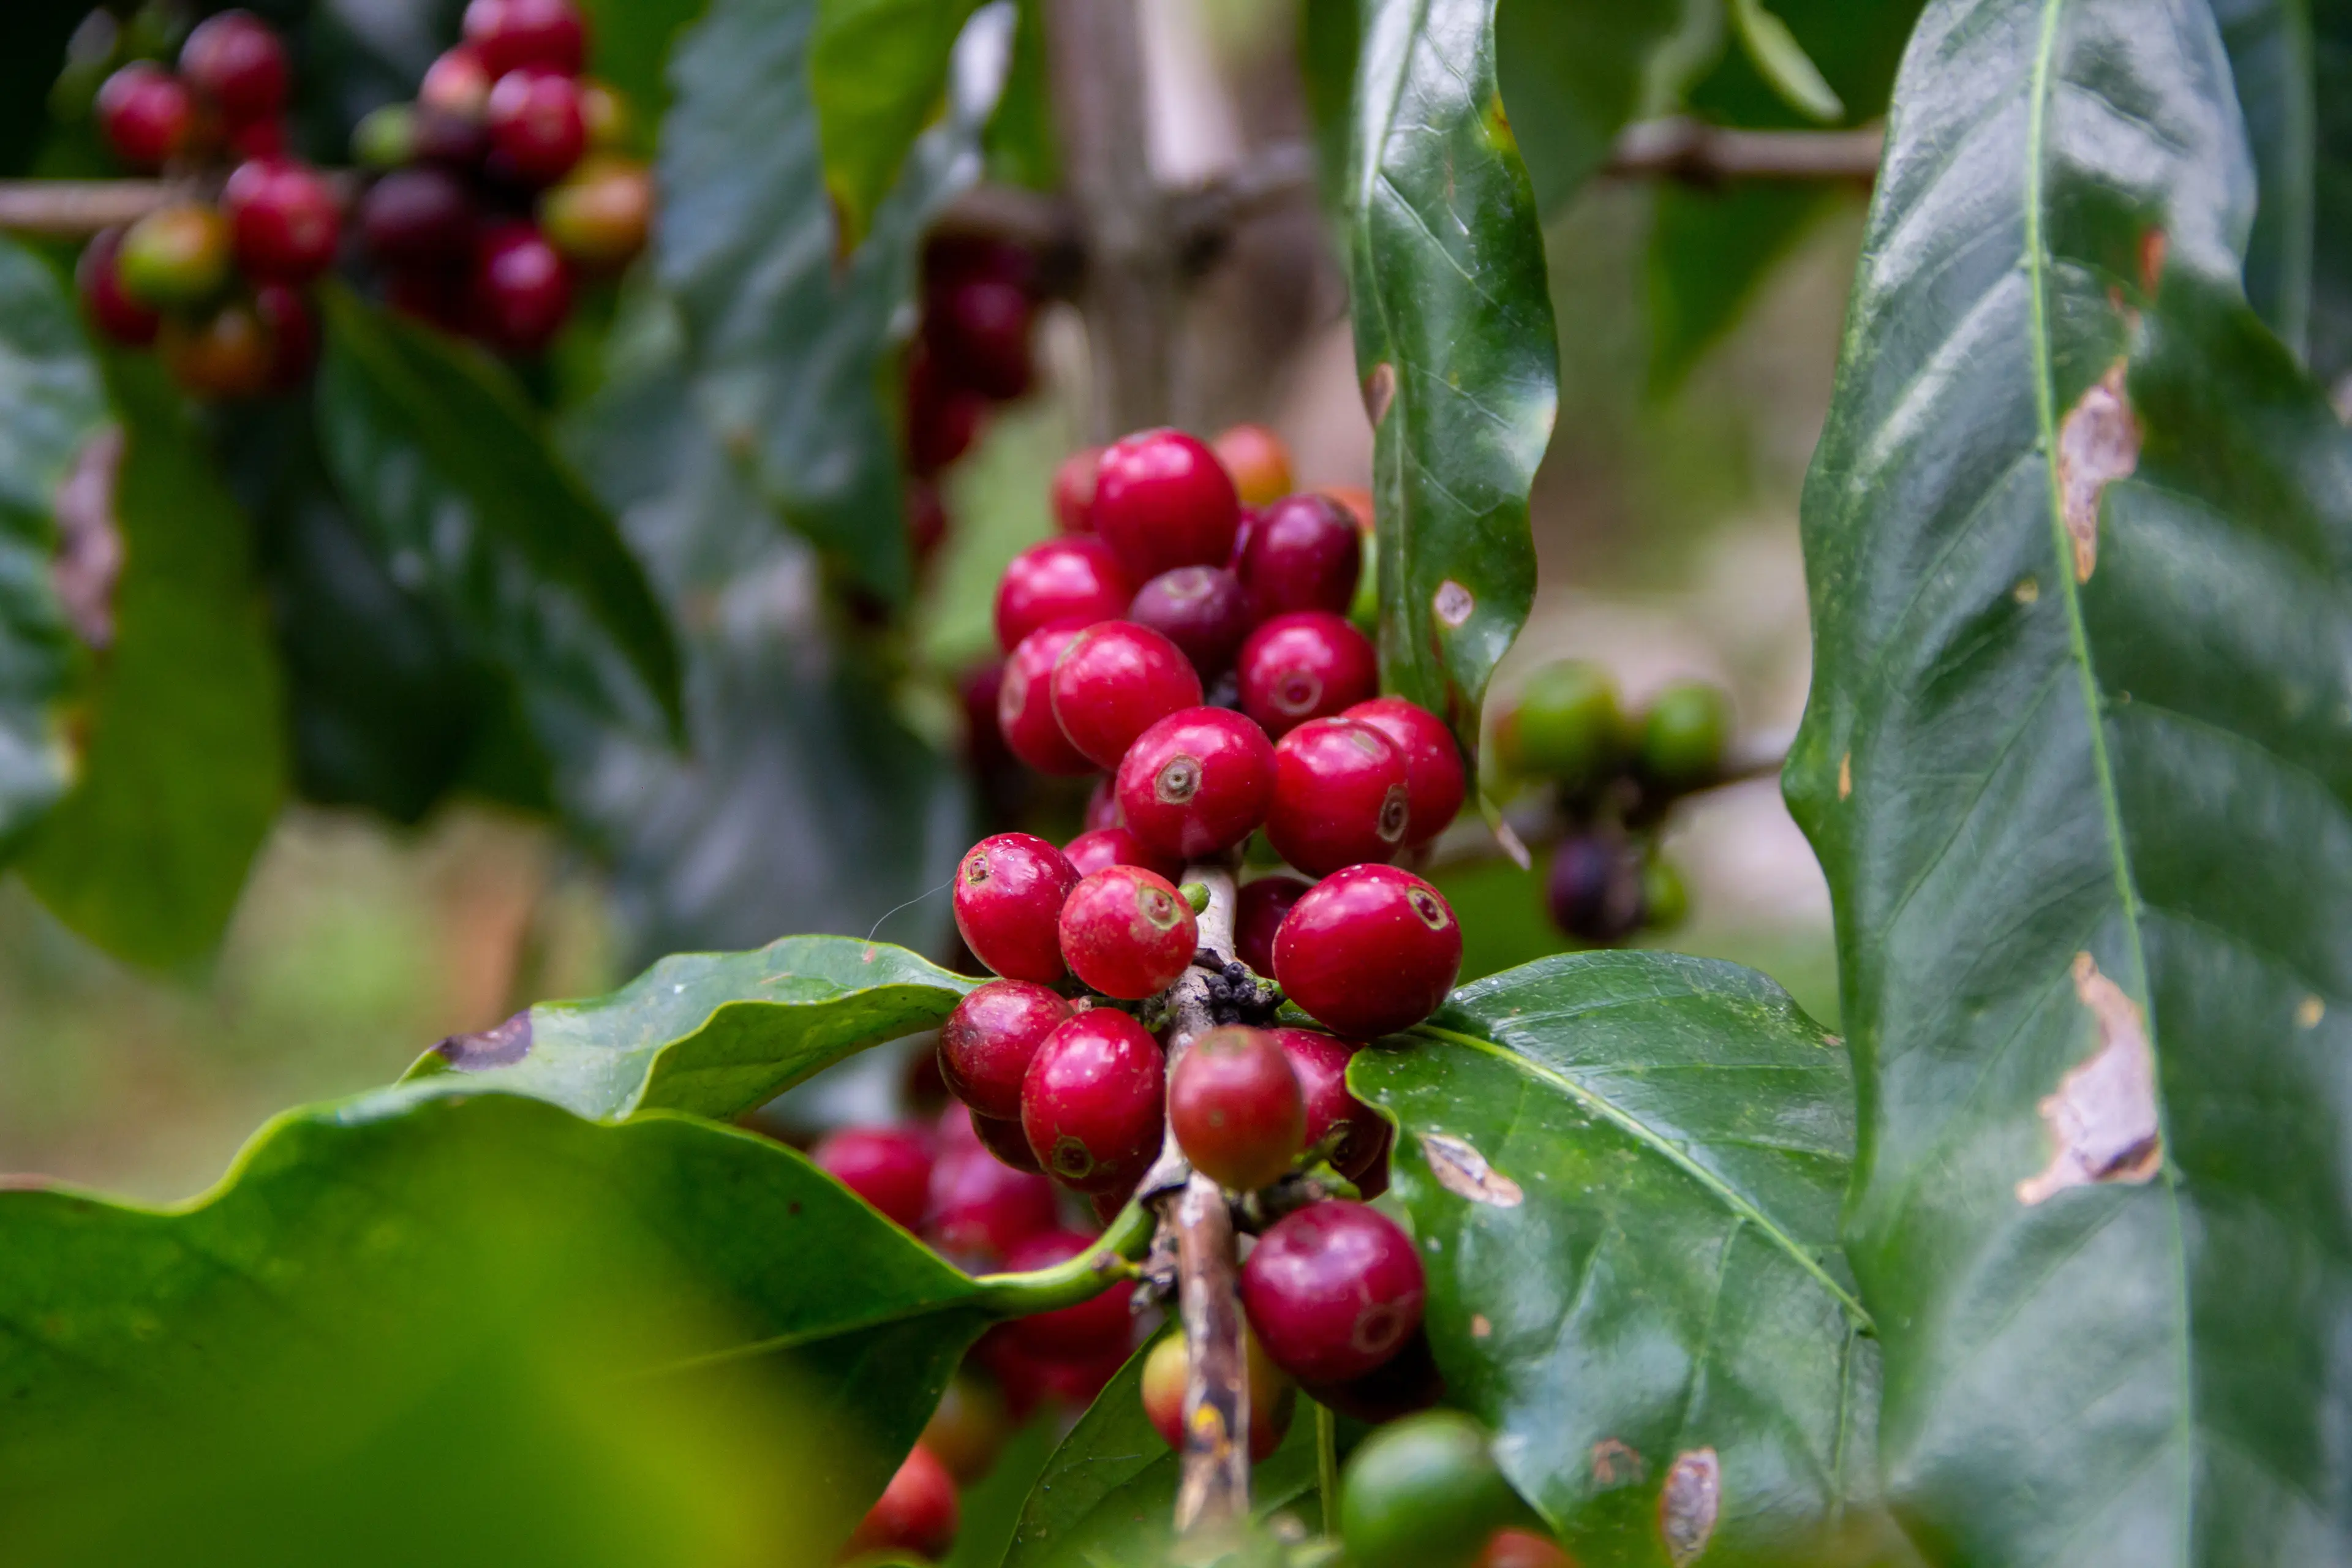 Early-stage coffee beans growing on a tree